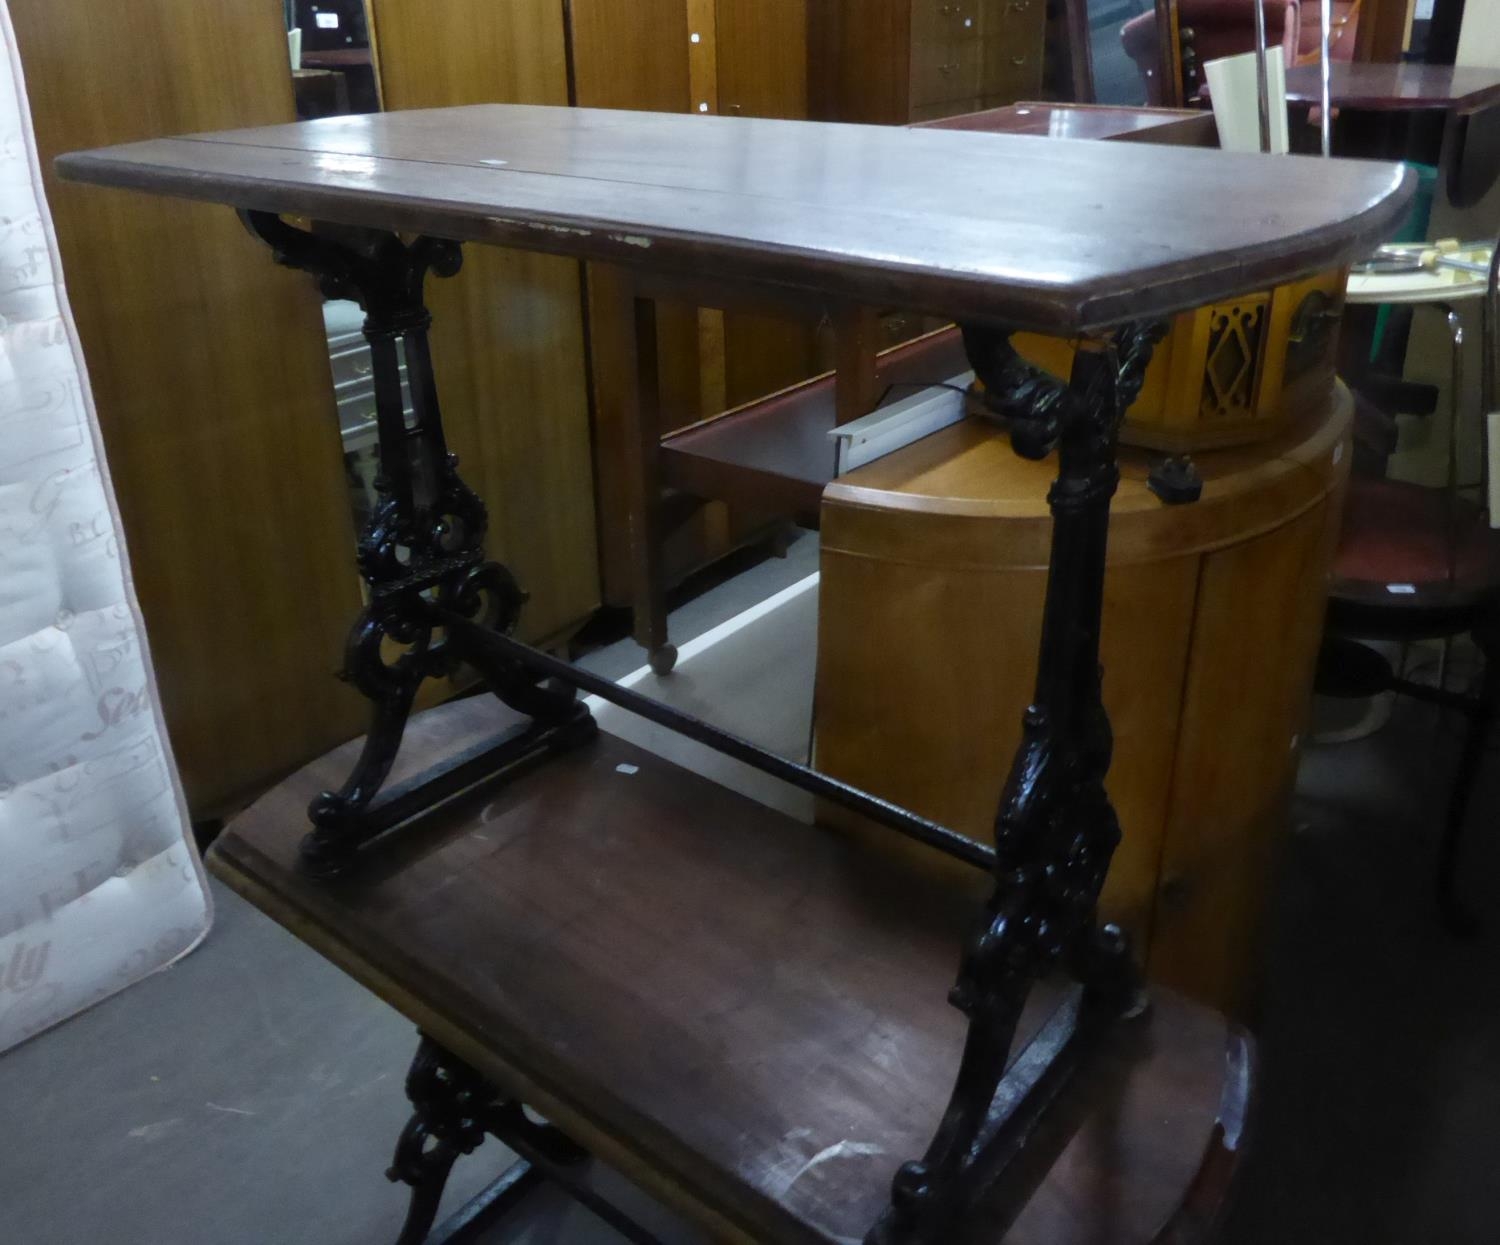 AN OBLONG CAST IRON PUB TABLE WITH WOODEN TOP